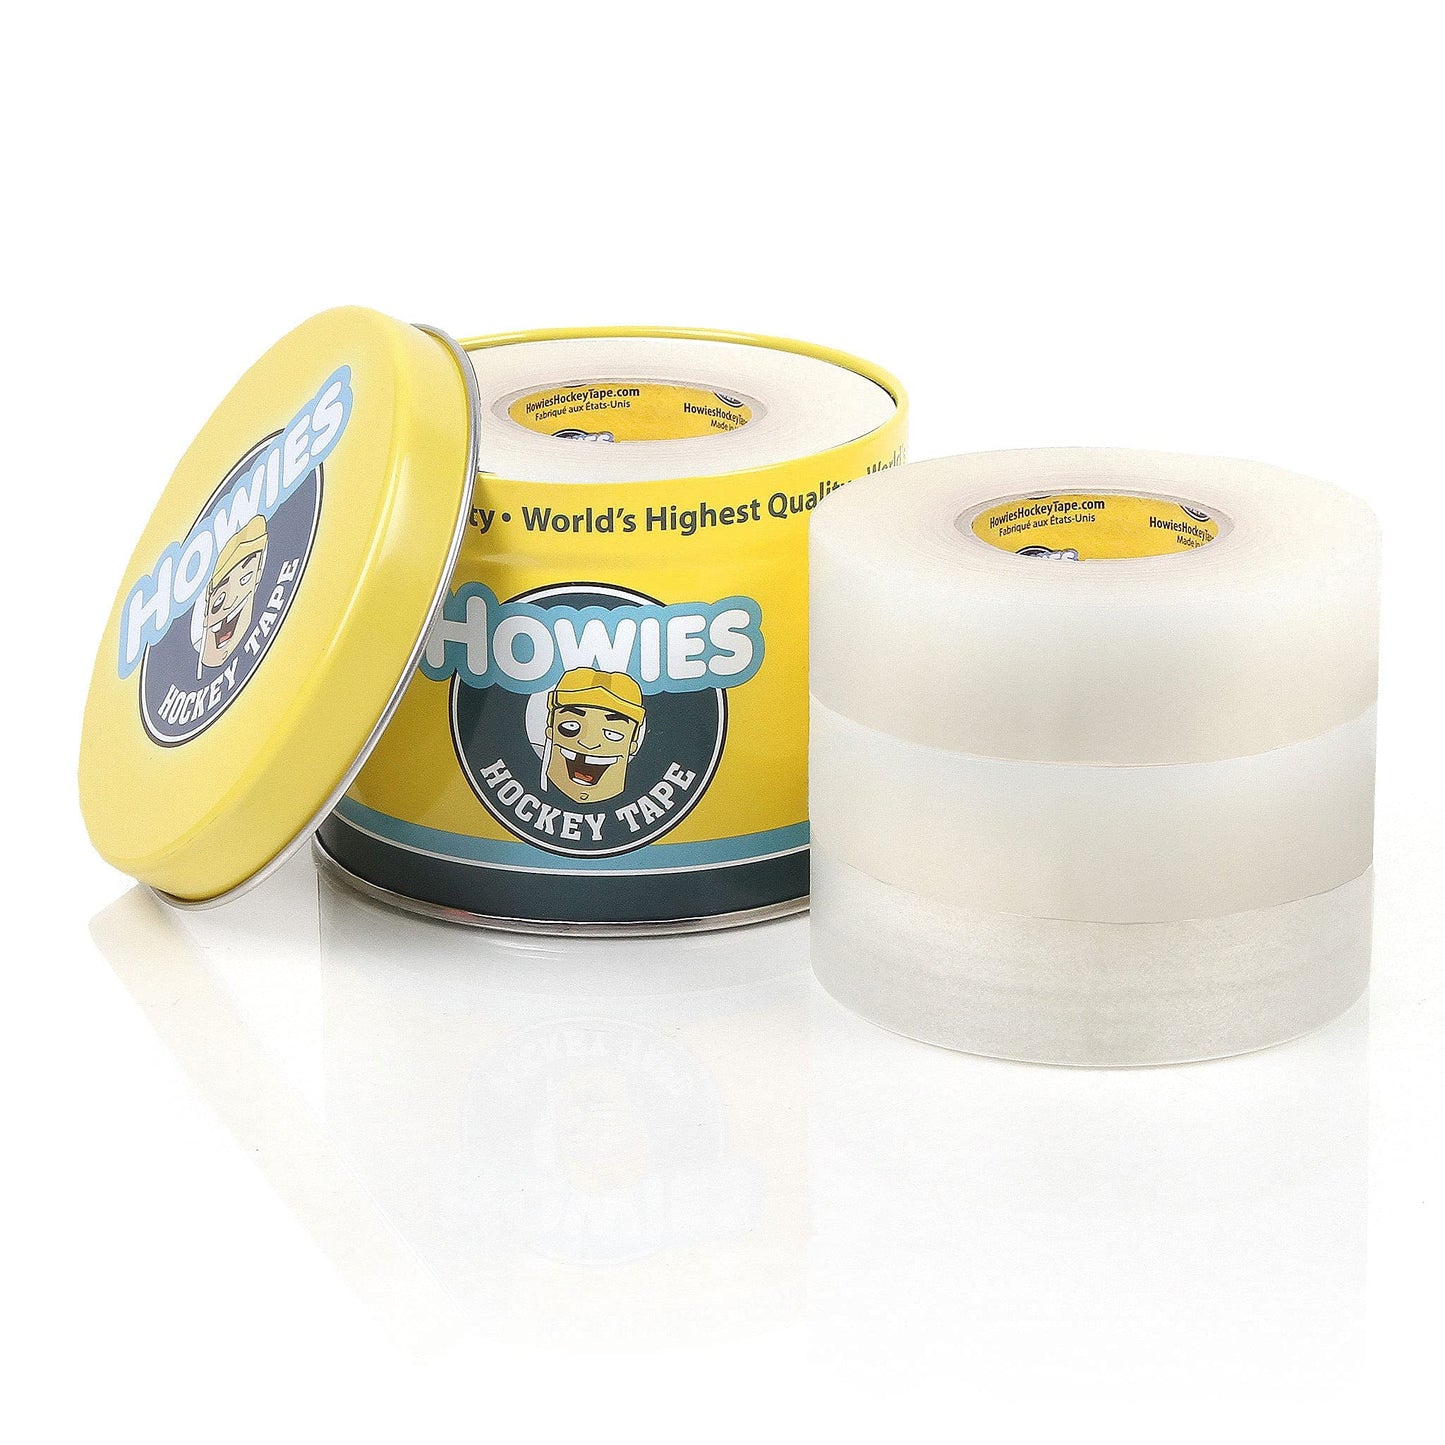 Howies Hockey Tape 6 Roll Pack - Cloth (1 Inch by 25 Yards Long) Clear/Poly (1" x 30yds) Free Tape TIN(Choose Your Colors) White, Black, Clear Shin Pad Sock Tape (6 Clear)